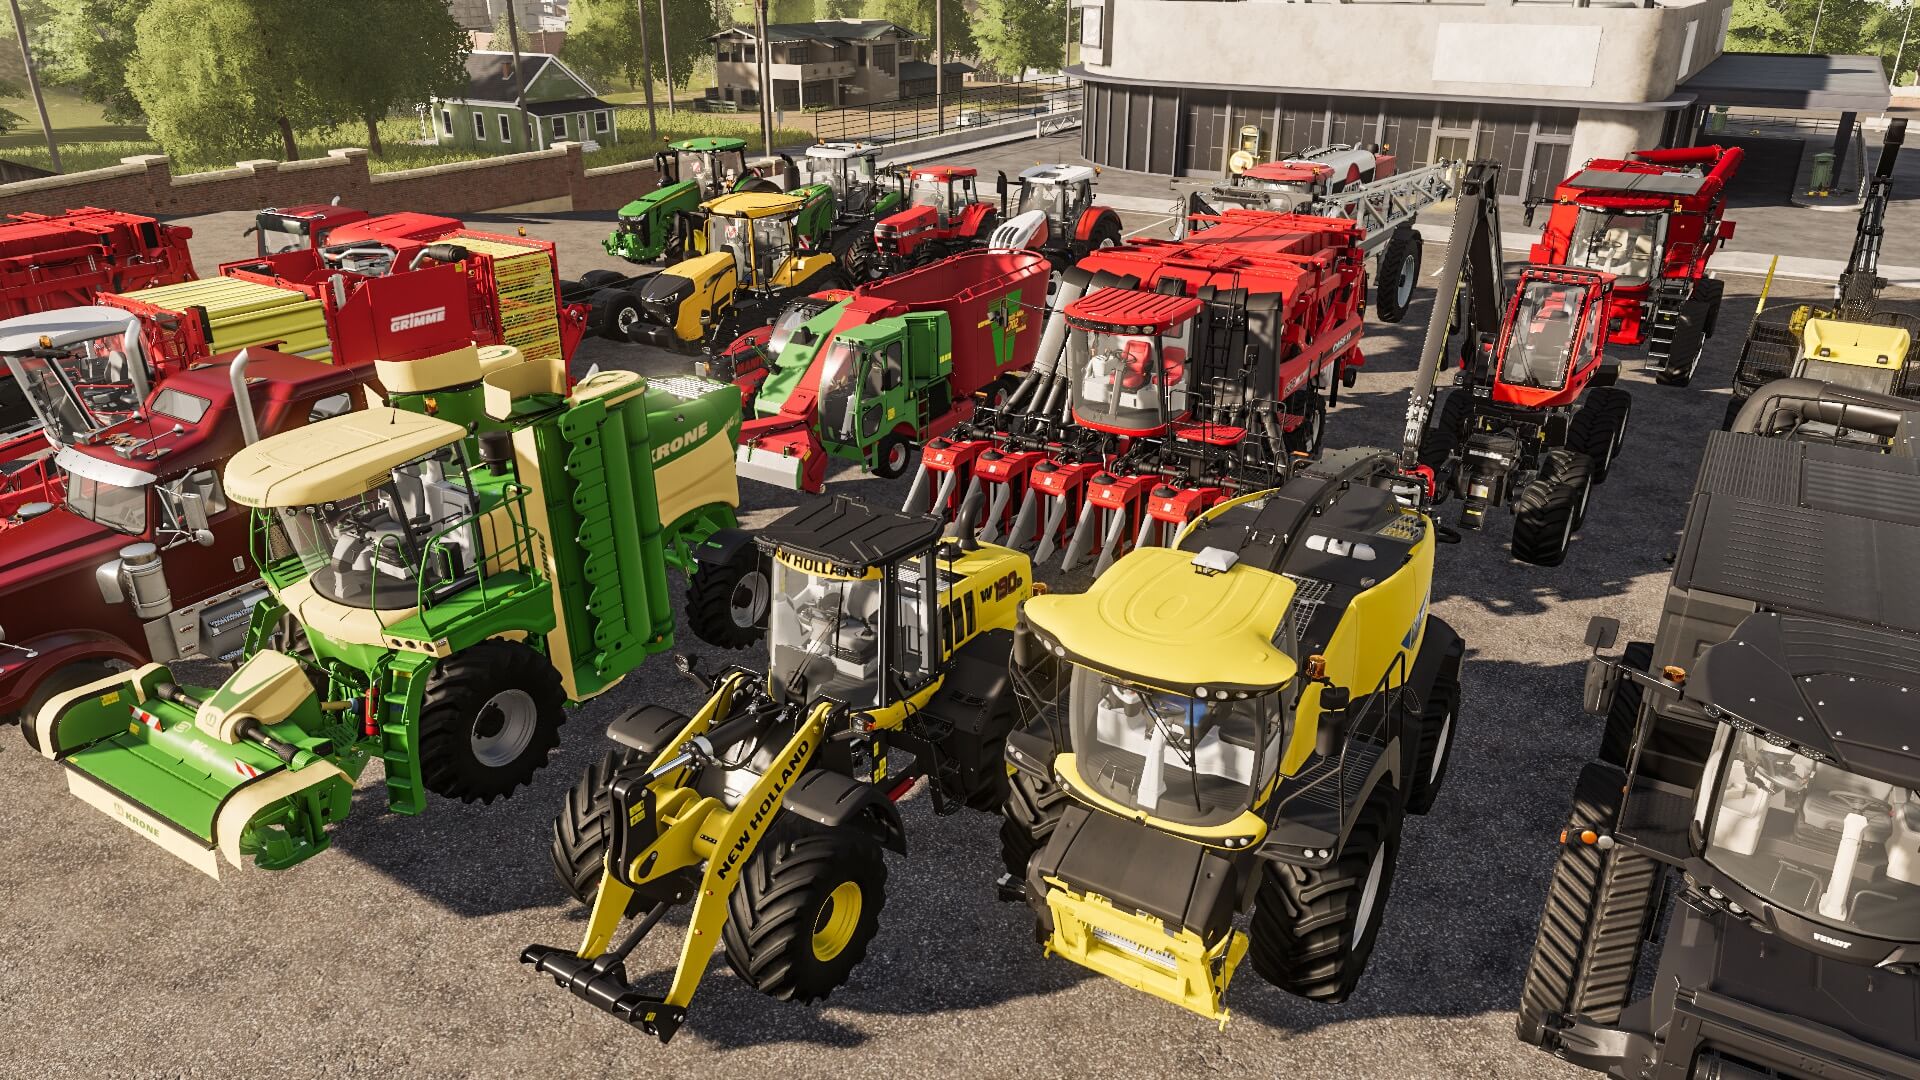 FARMING SIMULATOR 2019 HIGHLY COMPRESSED FOR PC IN 500 MB PARTS - TRAX GAMING CENTER